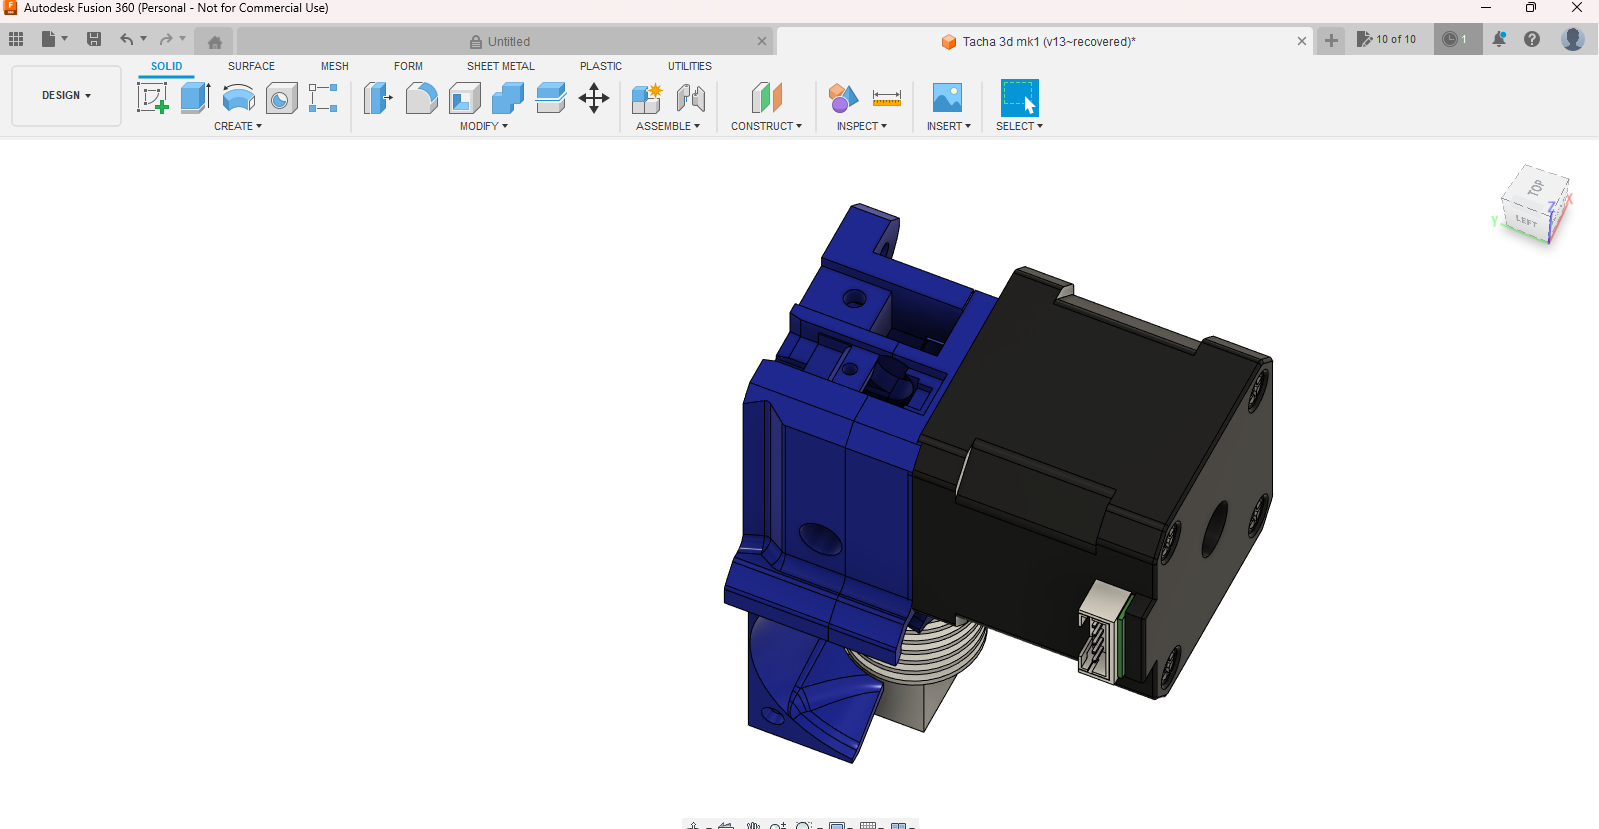 Autodesk Fusion 360 (Personal - Not for Commercial Use) 6_29_2023 10_03_34 PM.png